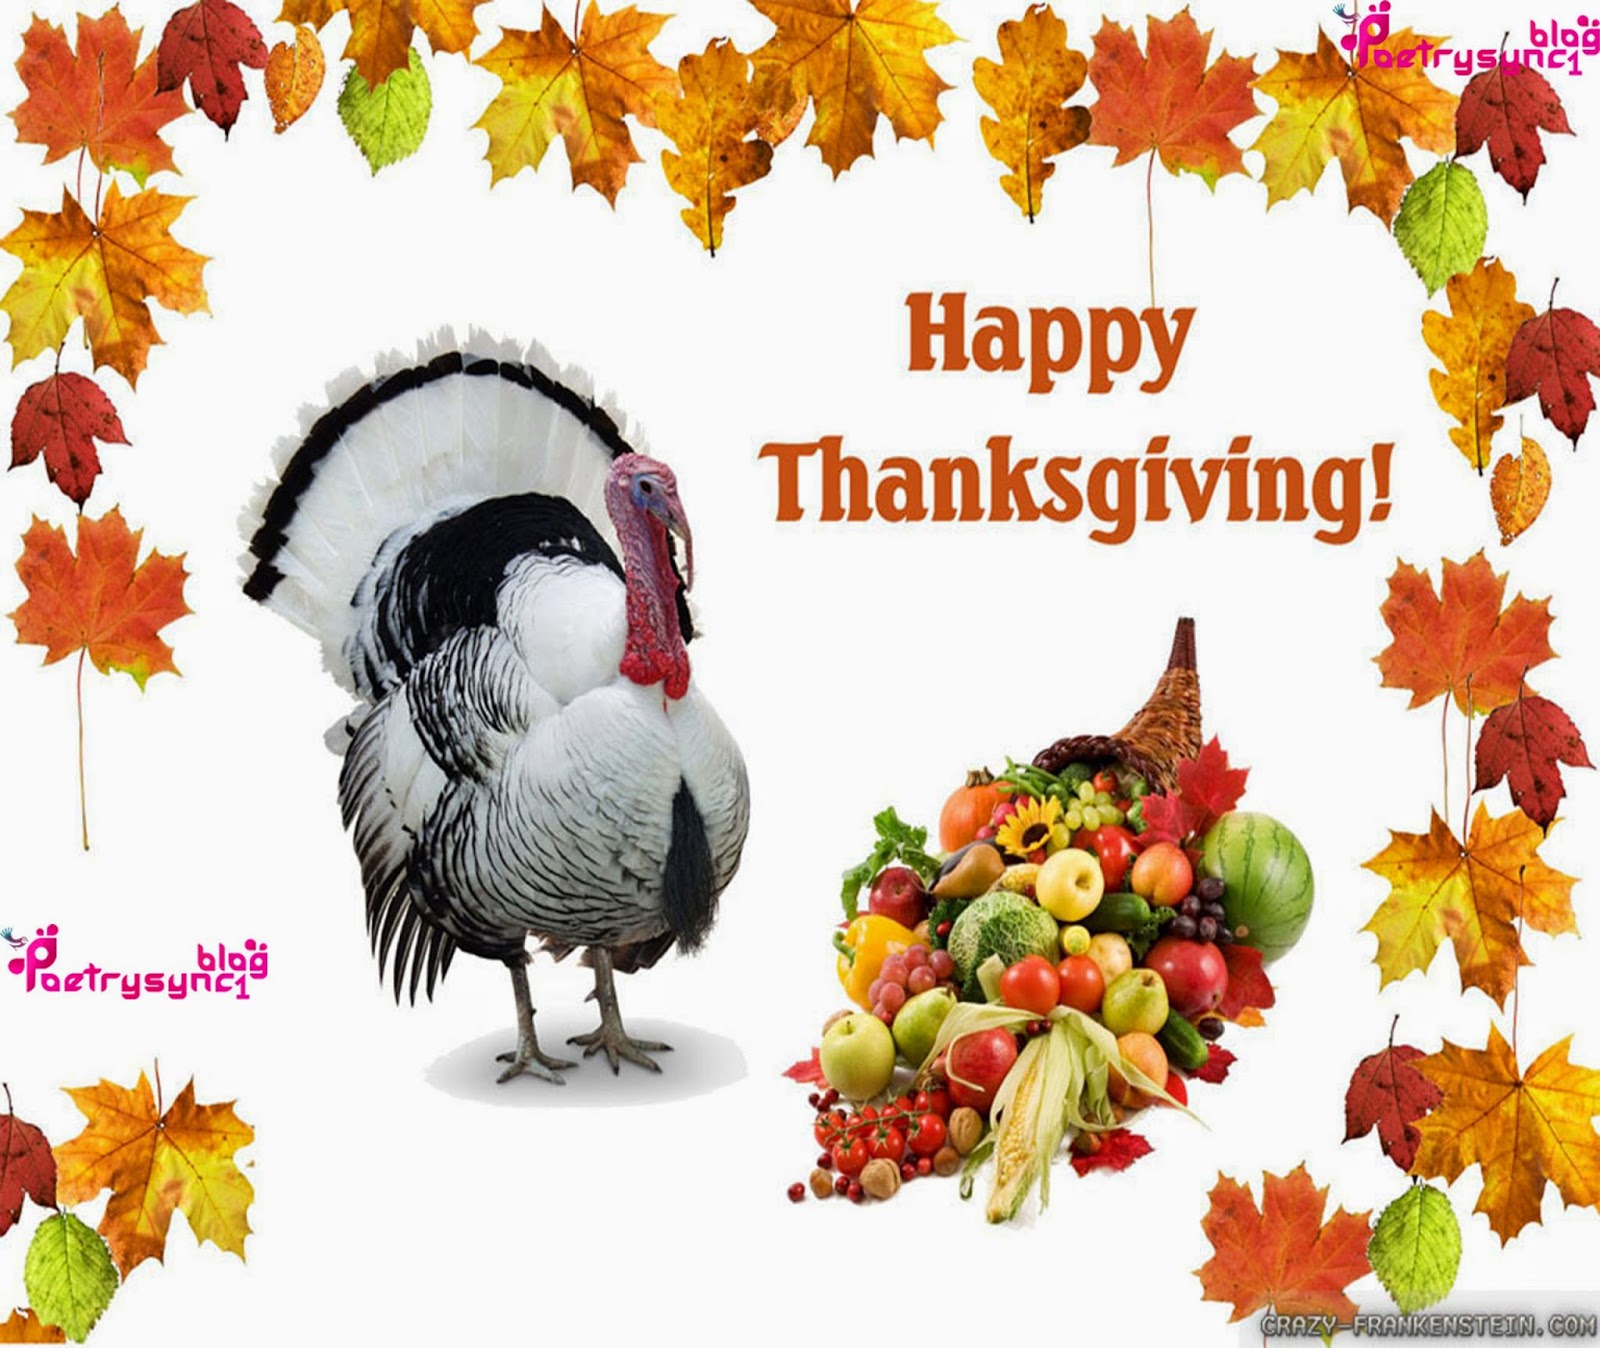 Happy-Thanksgiving-Day-Wallpaper-With-Quotes-By-poetrysync1.blog